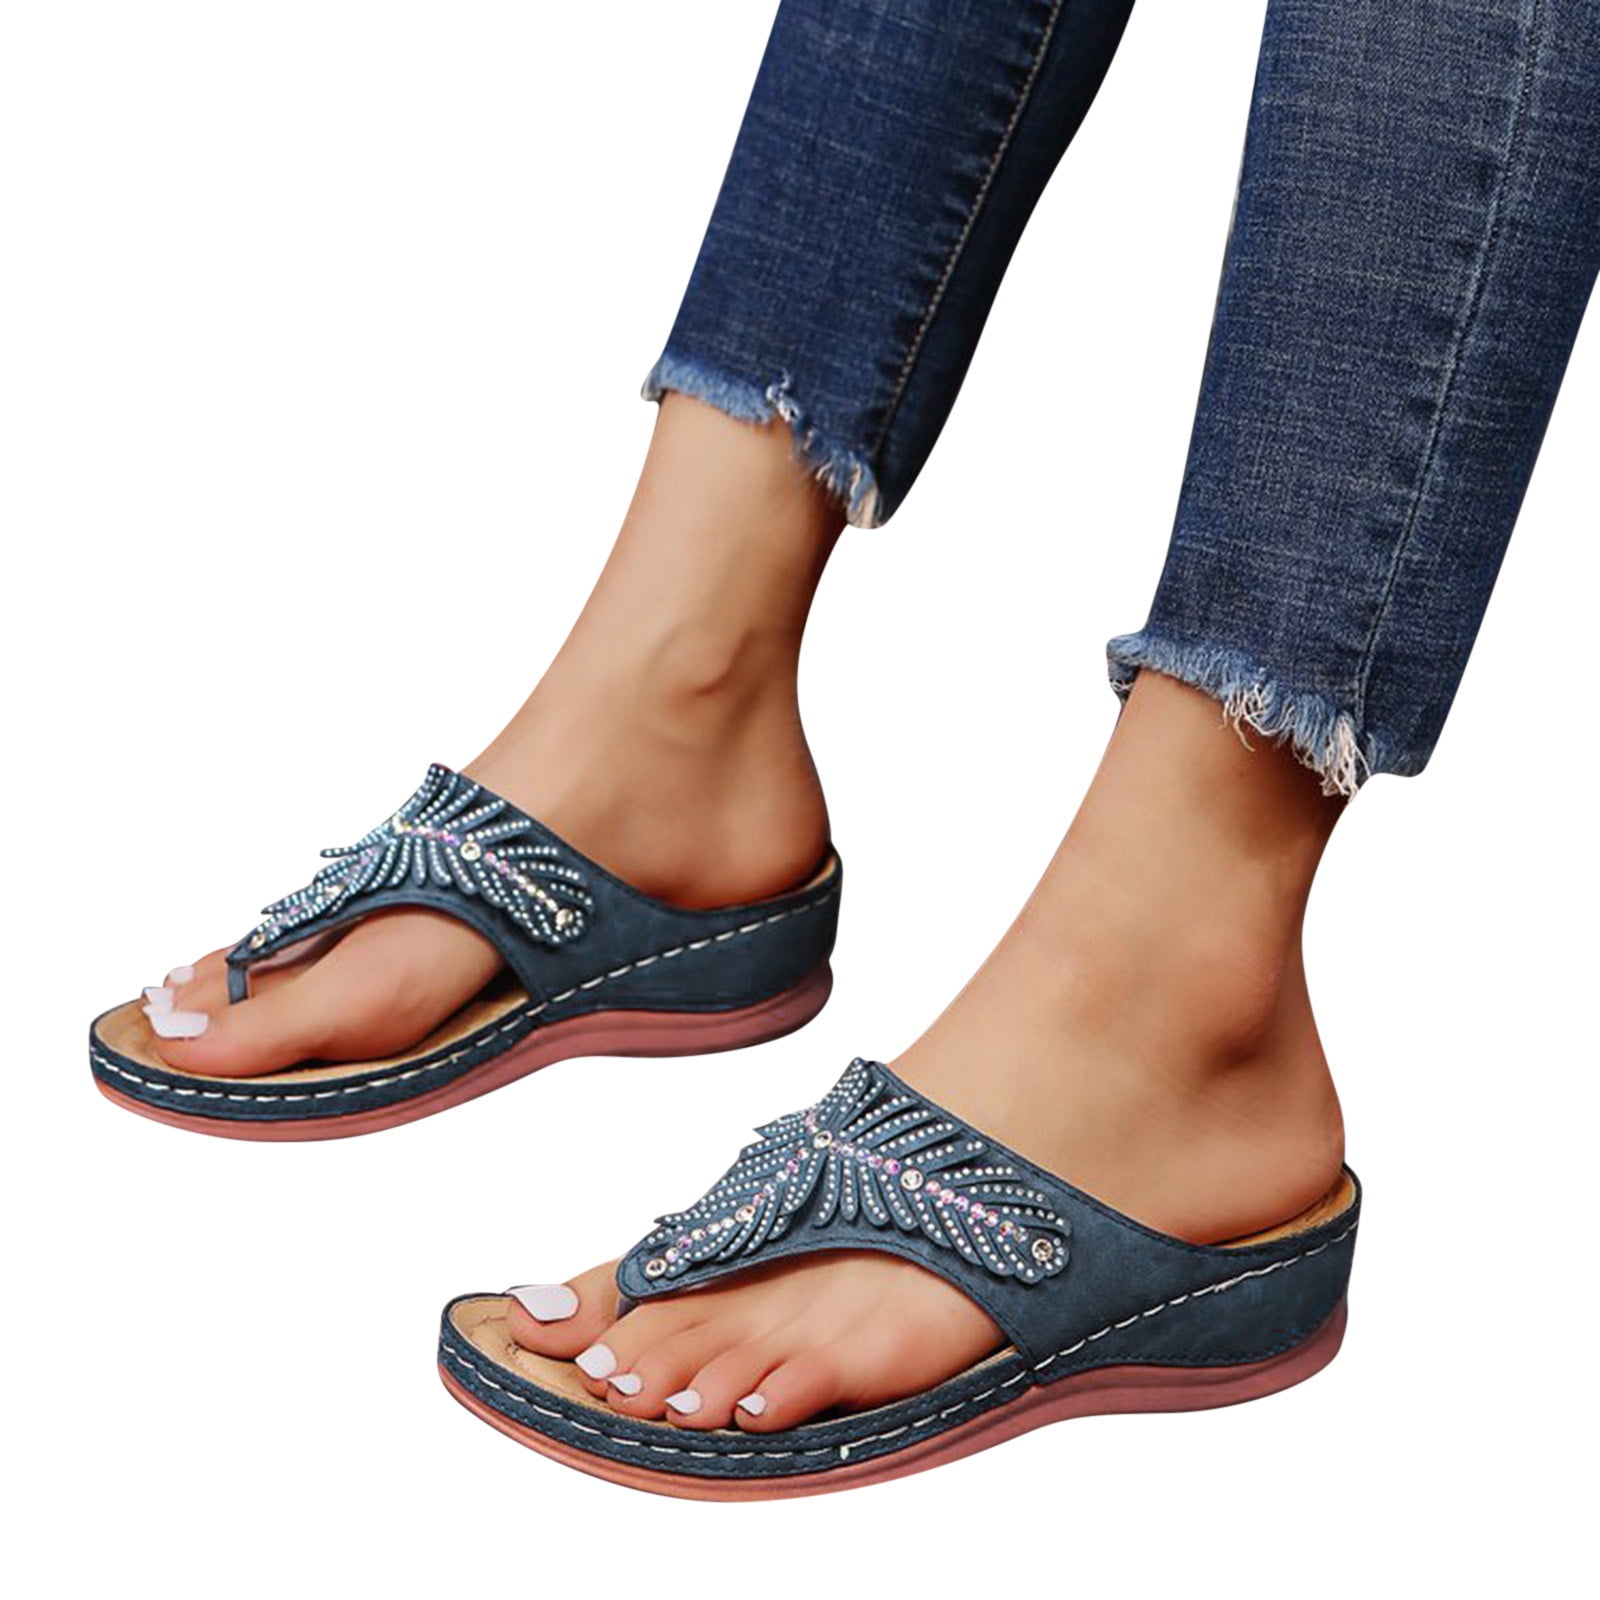 Gibobby Sandals for Women,Women Summer Casual Flat Strappy Platform Sandals Close Toe Wedges Comfy Outdoor Sandals Shoes 